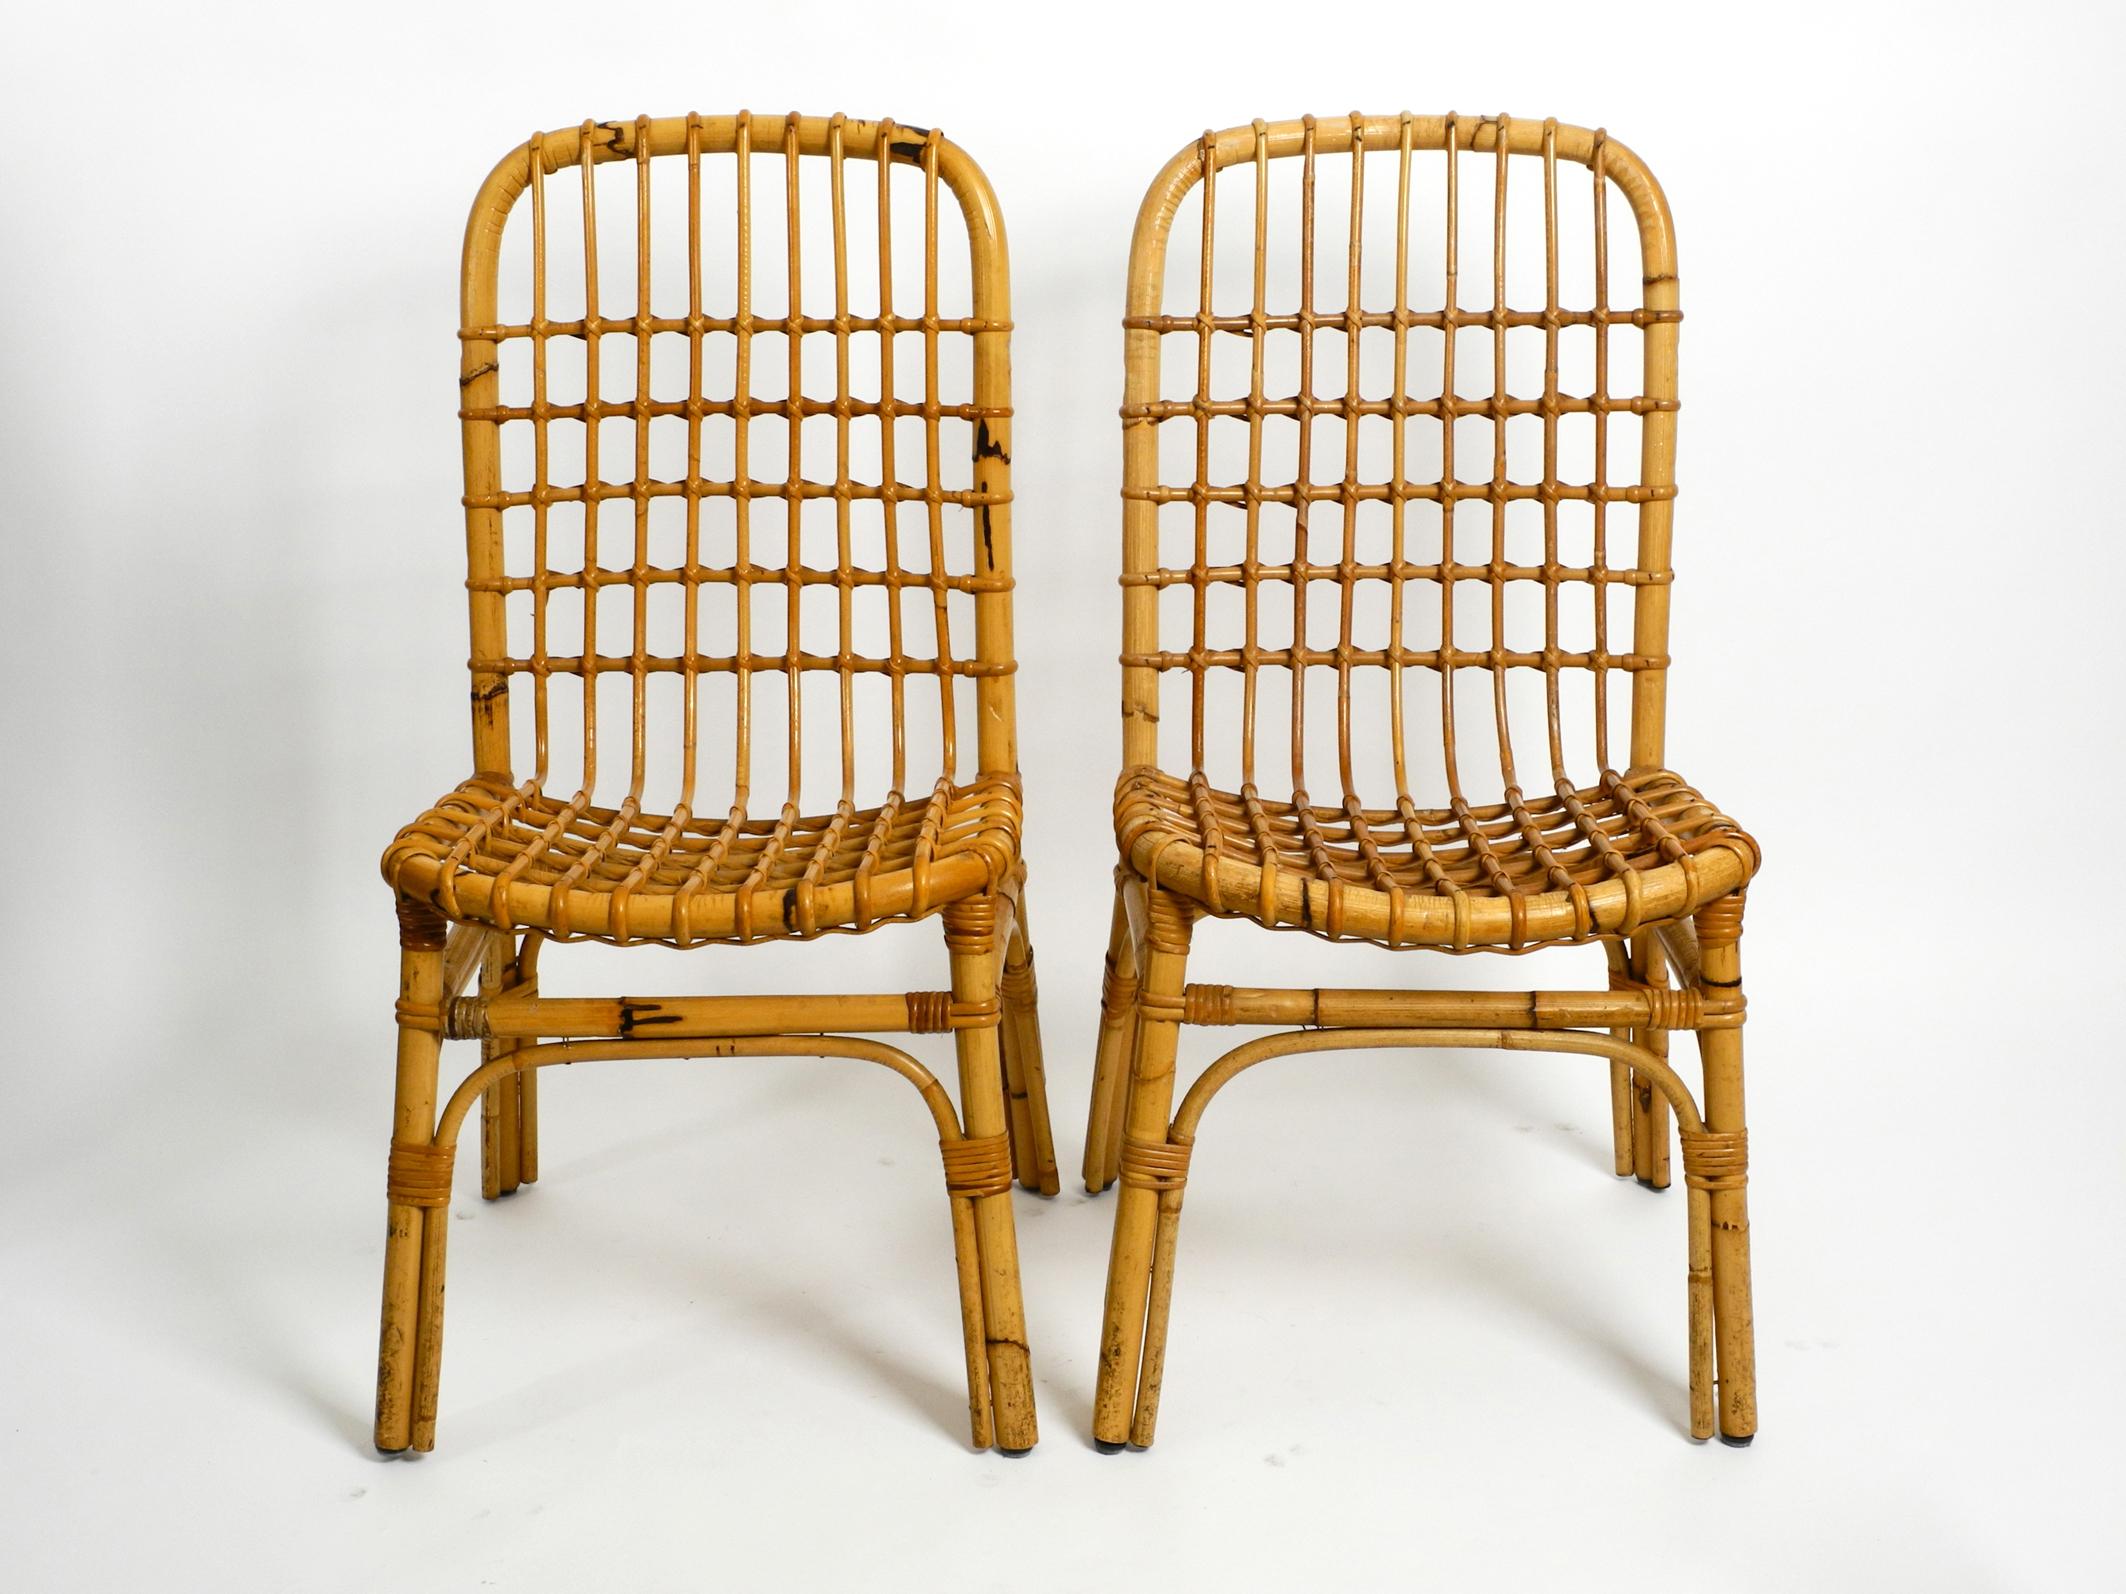 Two large 1960s Italian bamboo chairs in a very good vintage condition.
Large, inclined seat, has the dimensions of an armchair.
Beautiful design and very comfortable to sit on.
Completely made of bamboo in a very complex way.
Both chairs in the